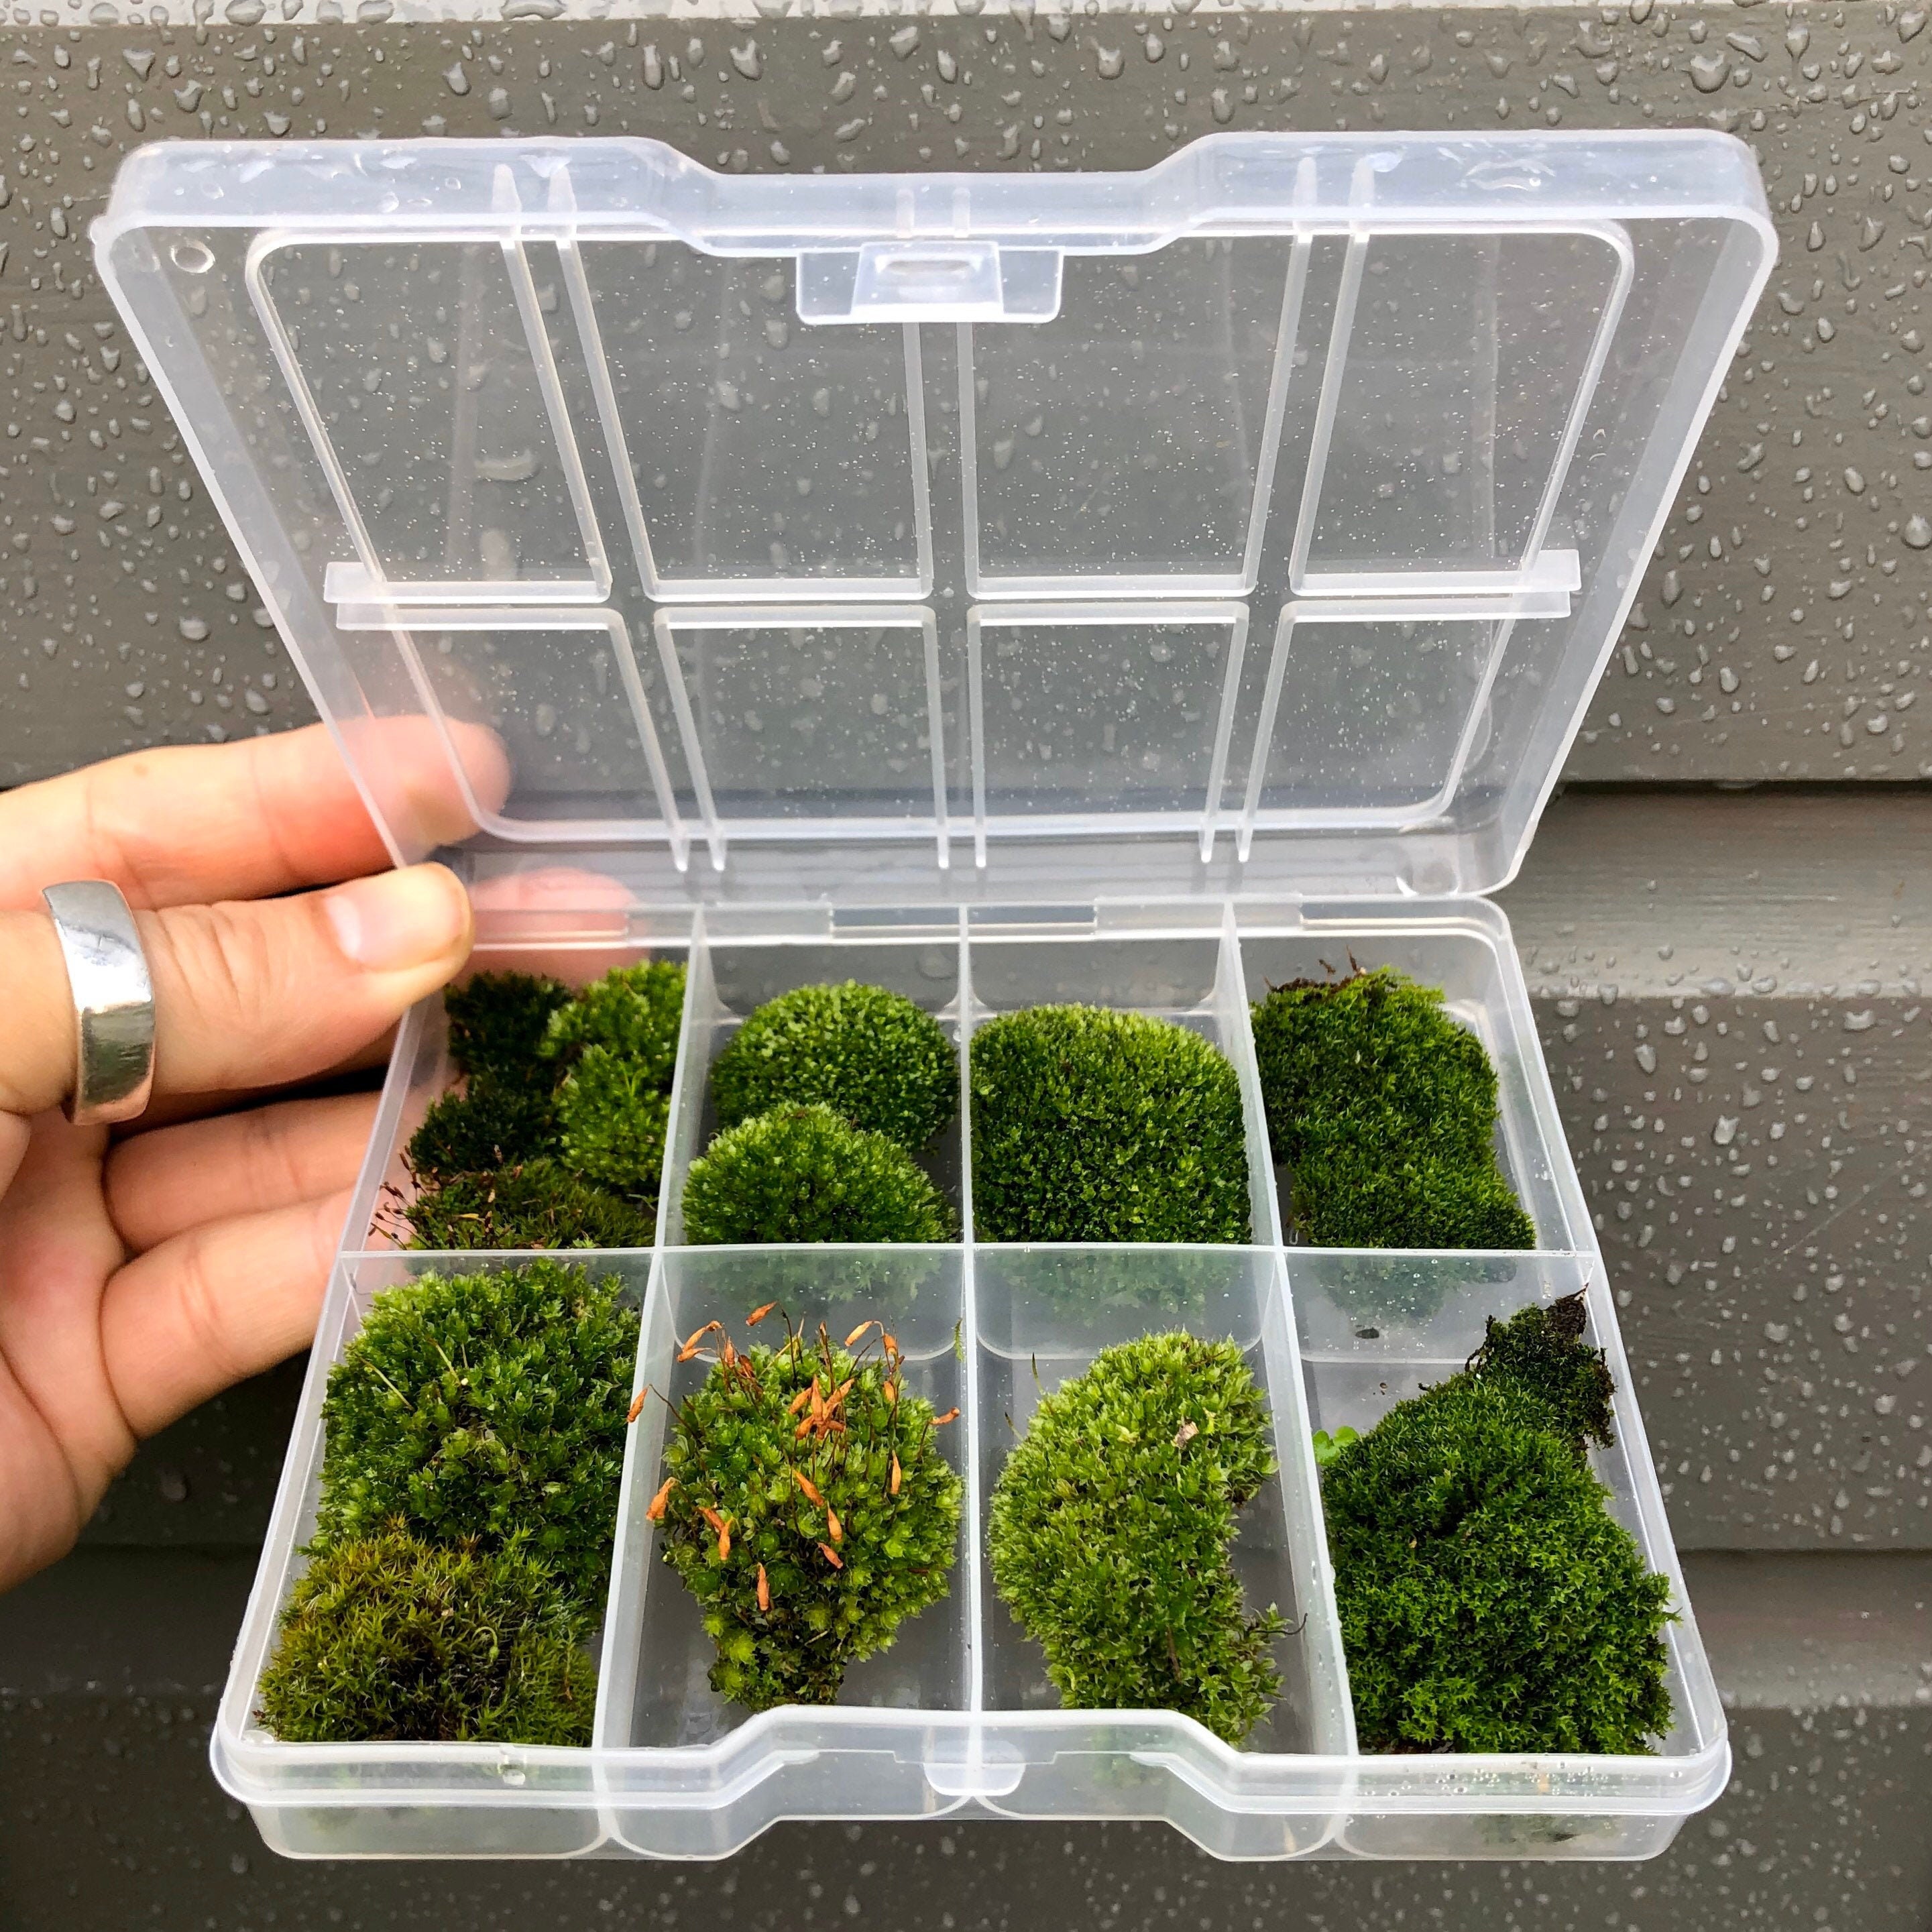 Live Moss Bonsai Tree (Case of 6 or 12) Packed for Retail – Moss Acres